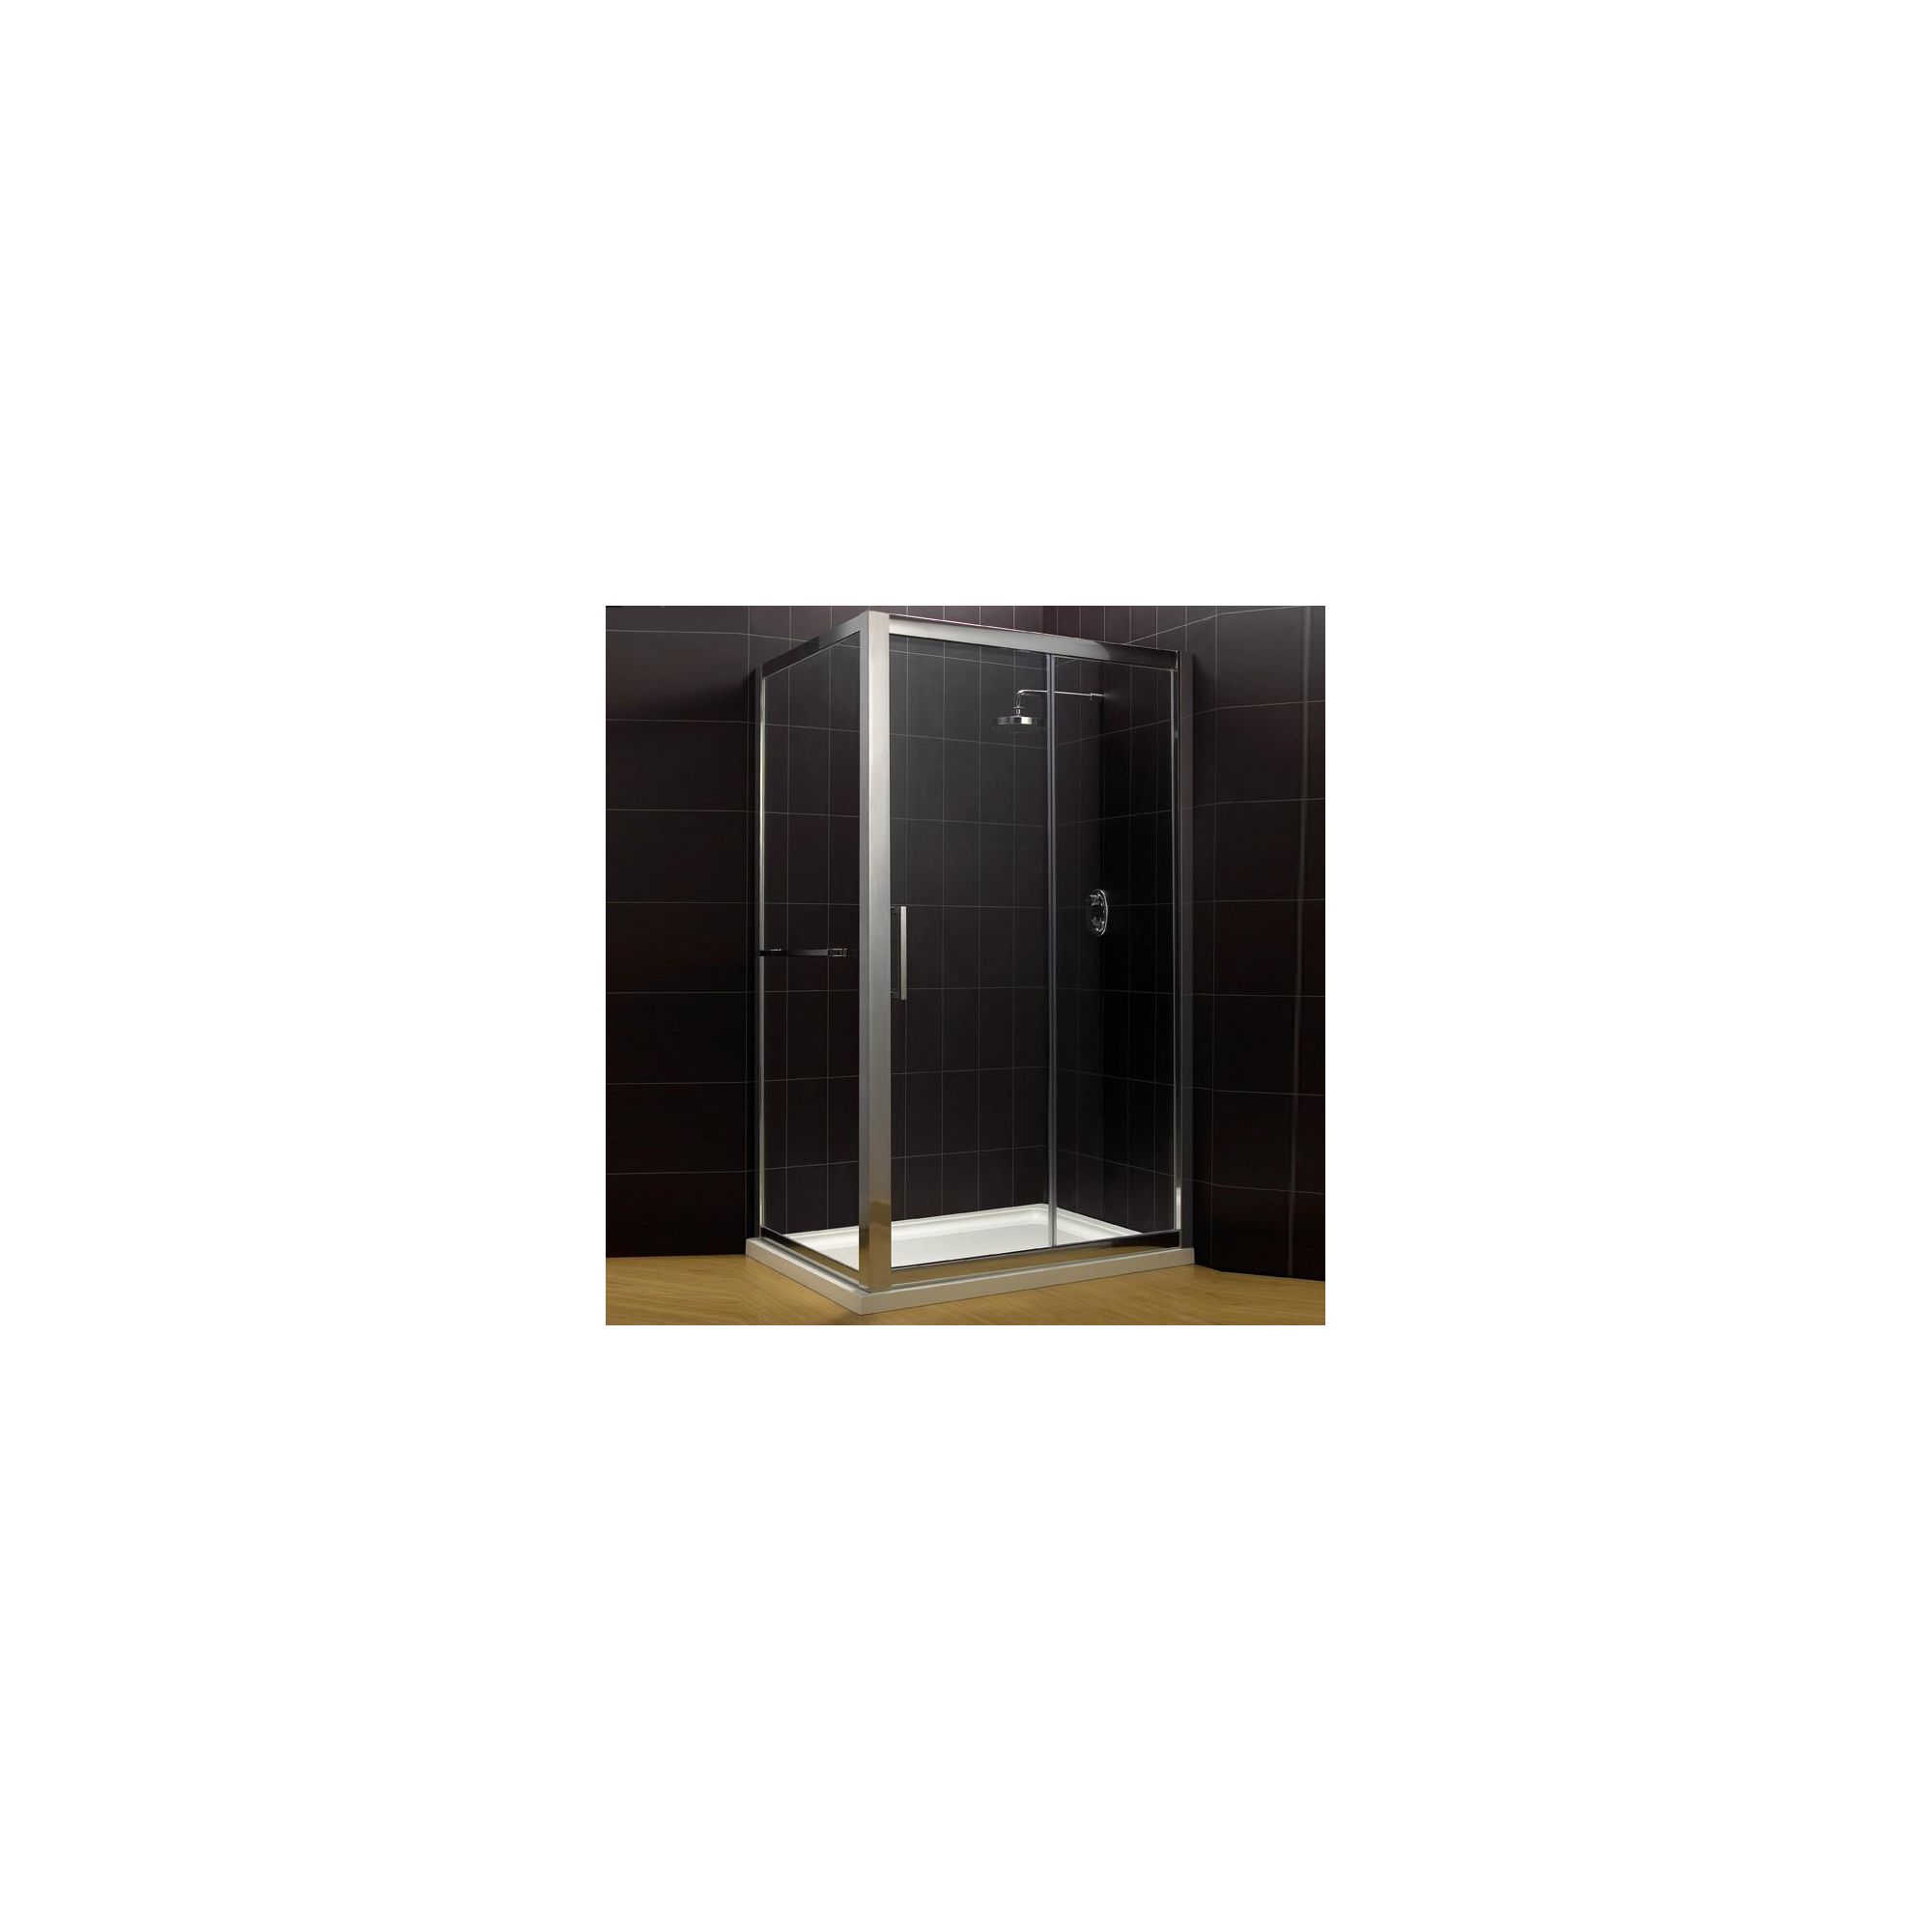 Duchy Supreme Silver Sliding Door Shower Enclosure, 1700mm x 760mm, Standard Tray, 8mm Glass at Tescos Direct